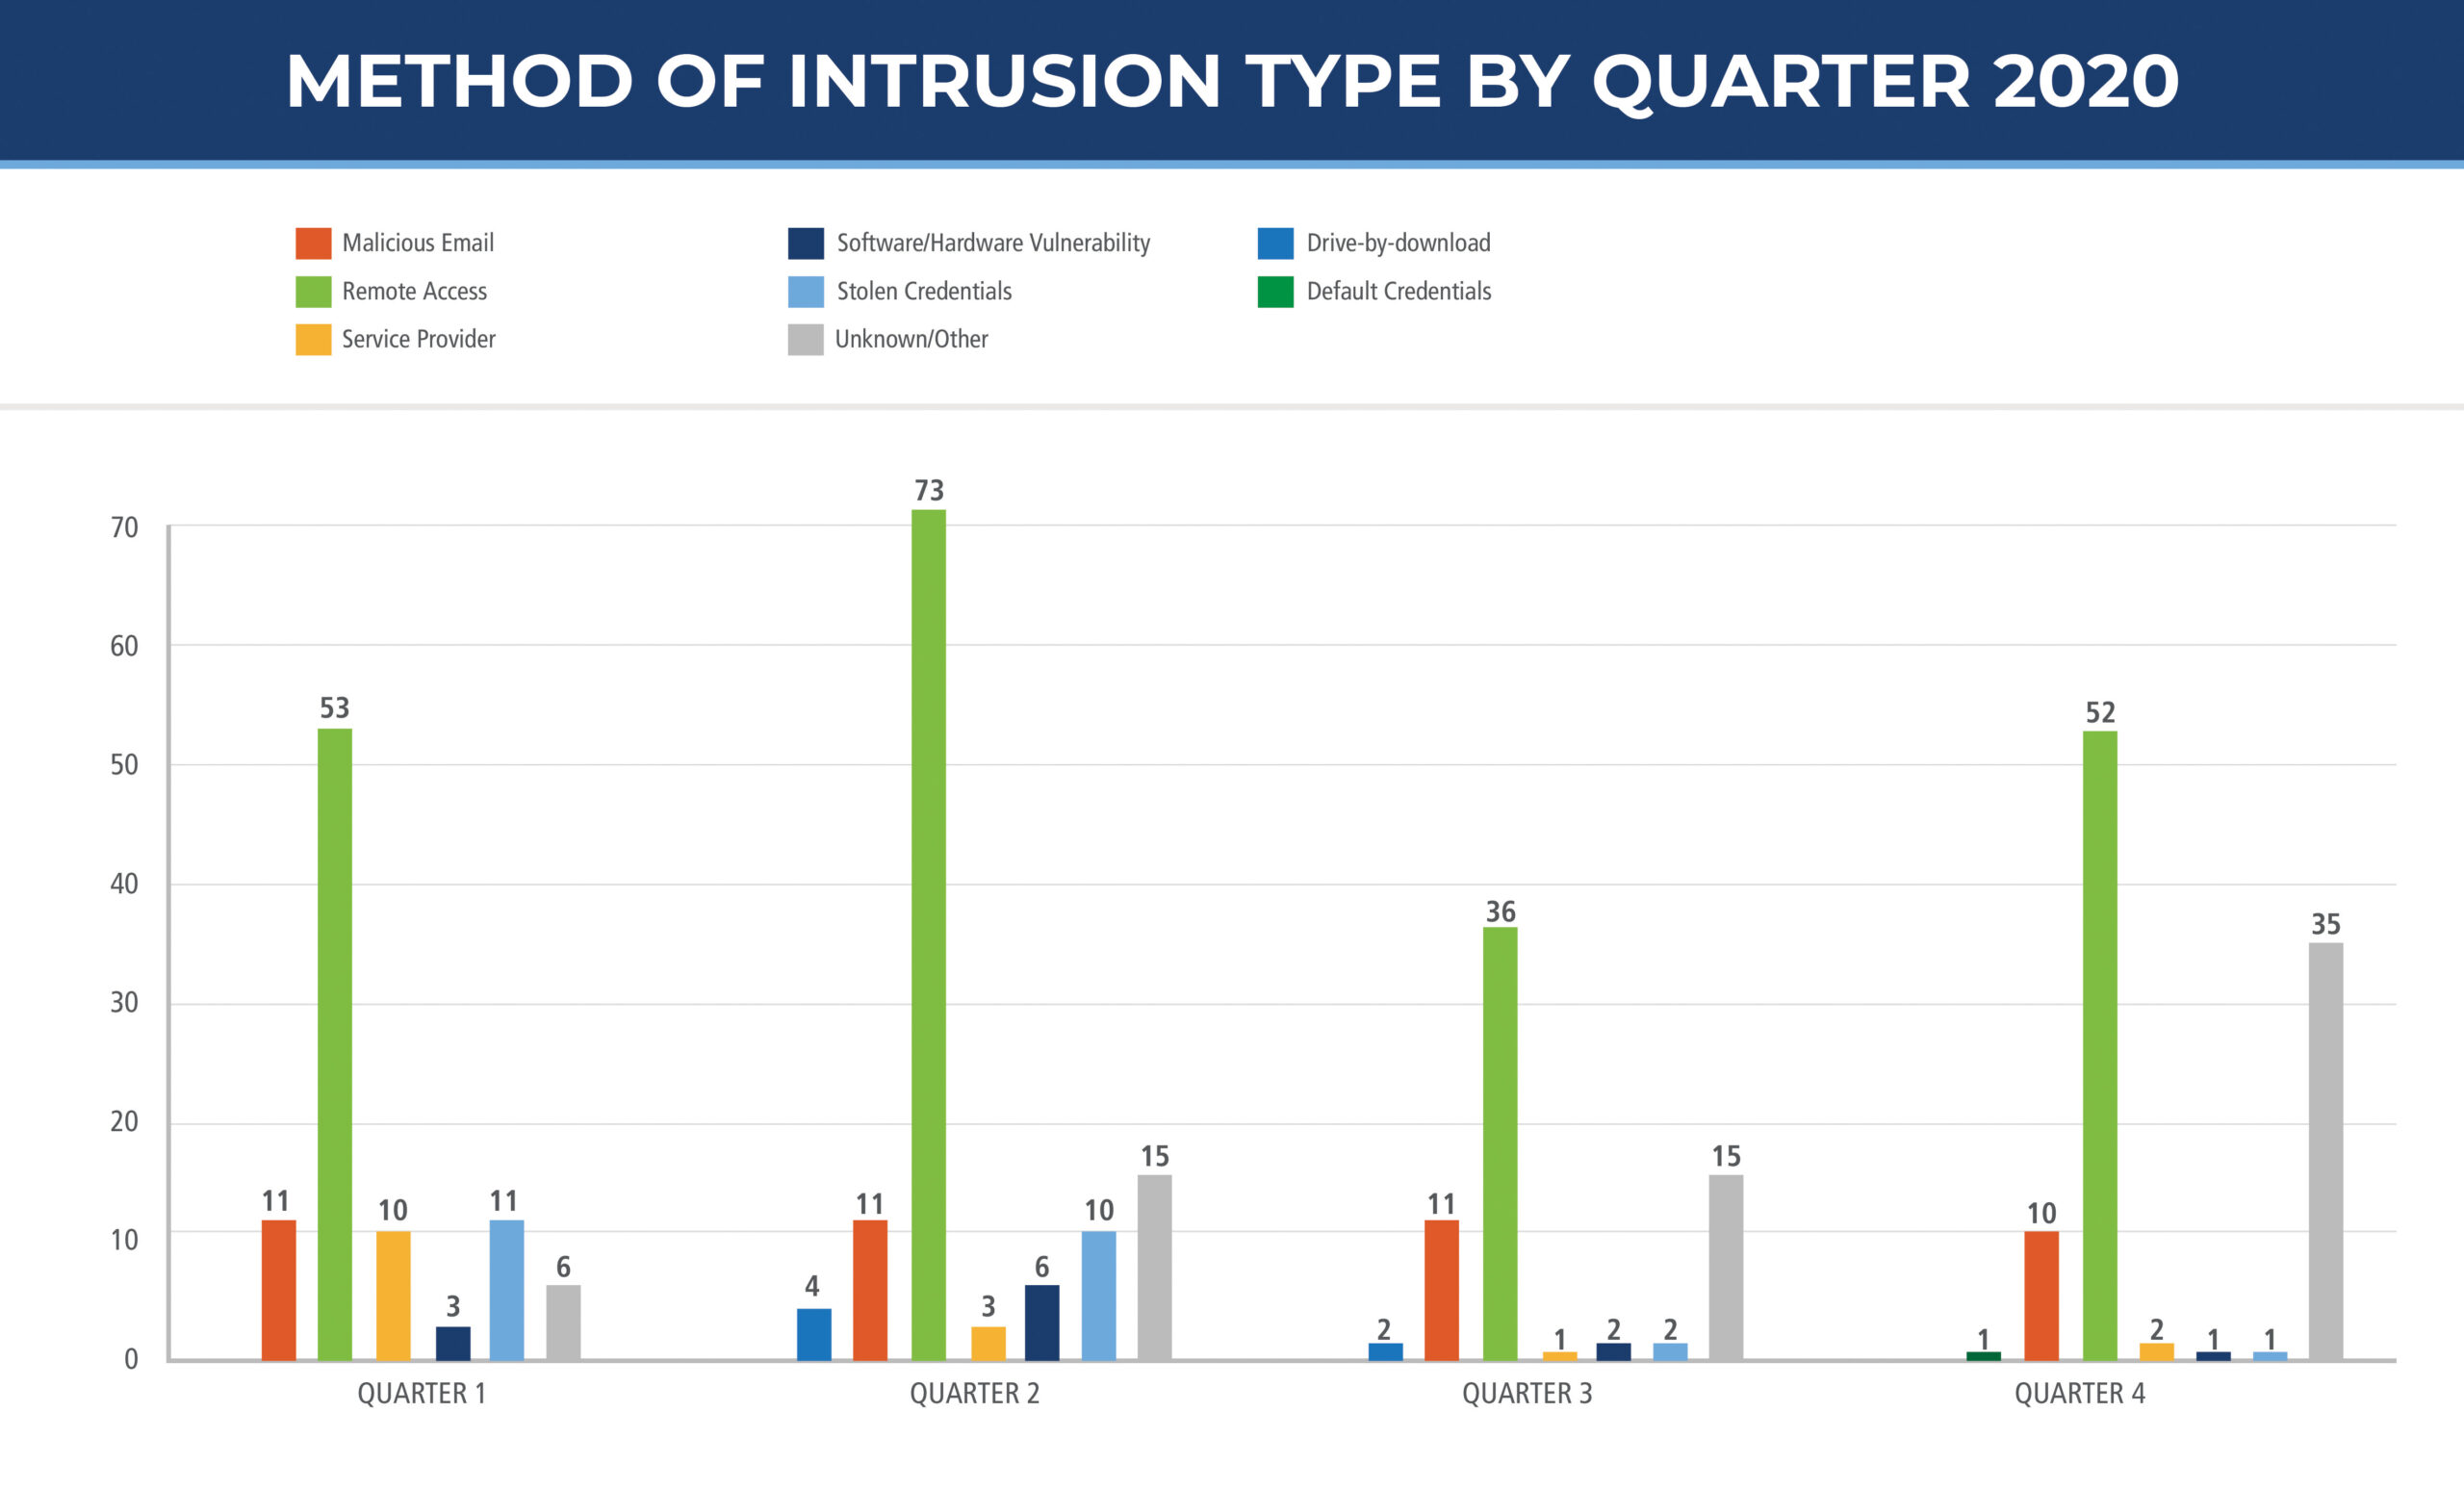 Method of intrusion by quarter